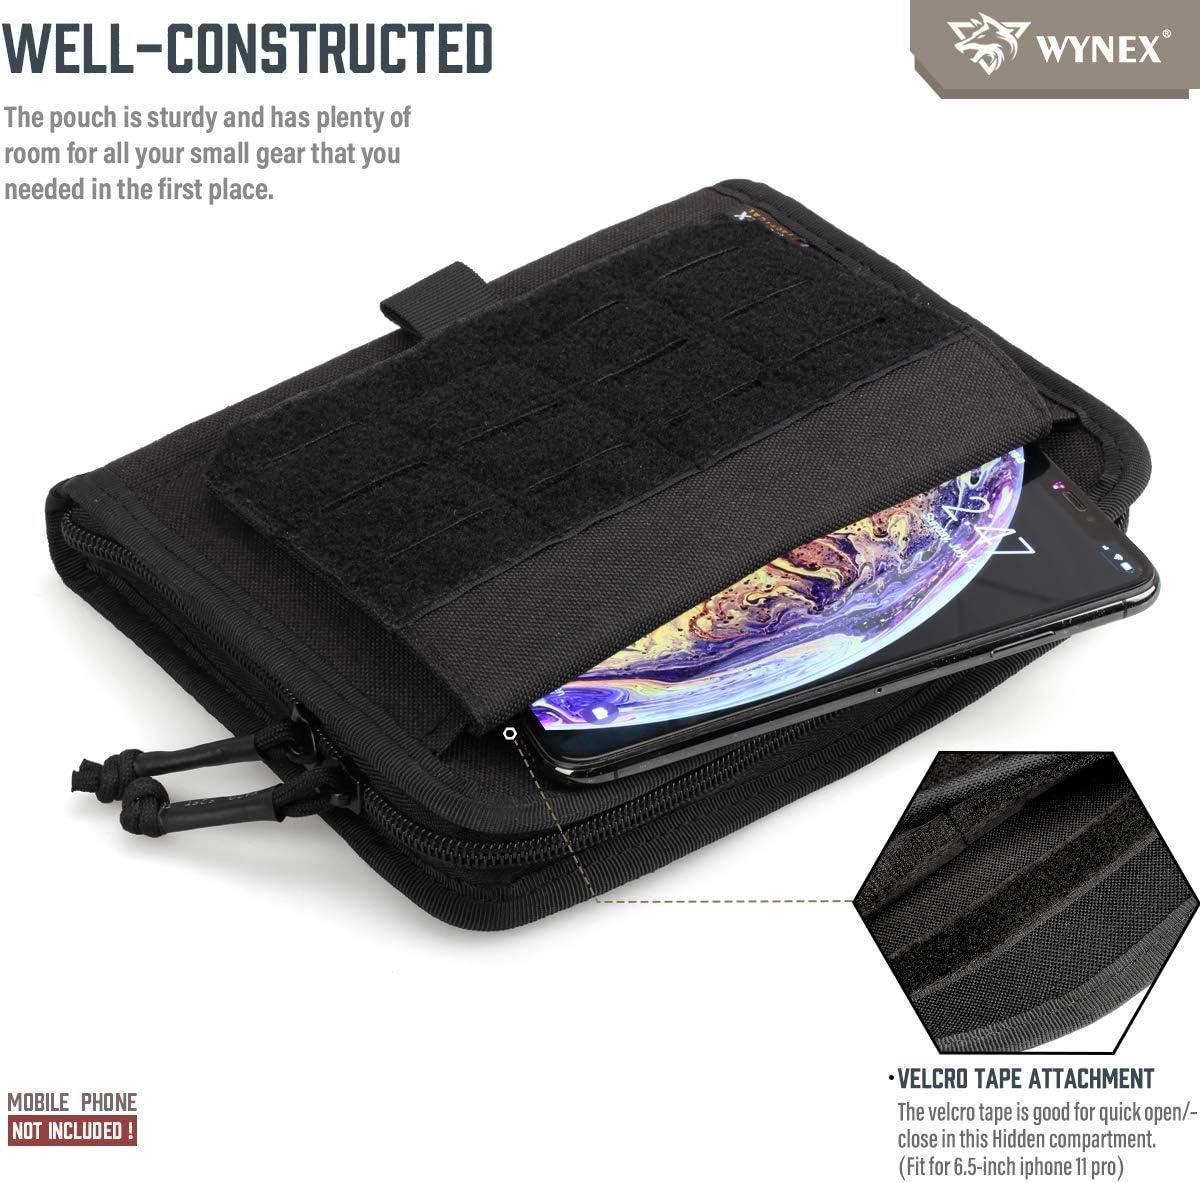 WYNEX Tactical Folding Admin Pouch, Molle Tool Bag of Laser-Cut Design,  Utility Organizer EDC Medical Bag Modular Pouches Tactical Attachment Waist  Pouch Include U.S Patch Black